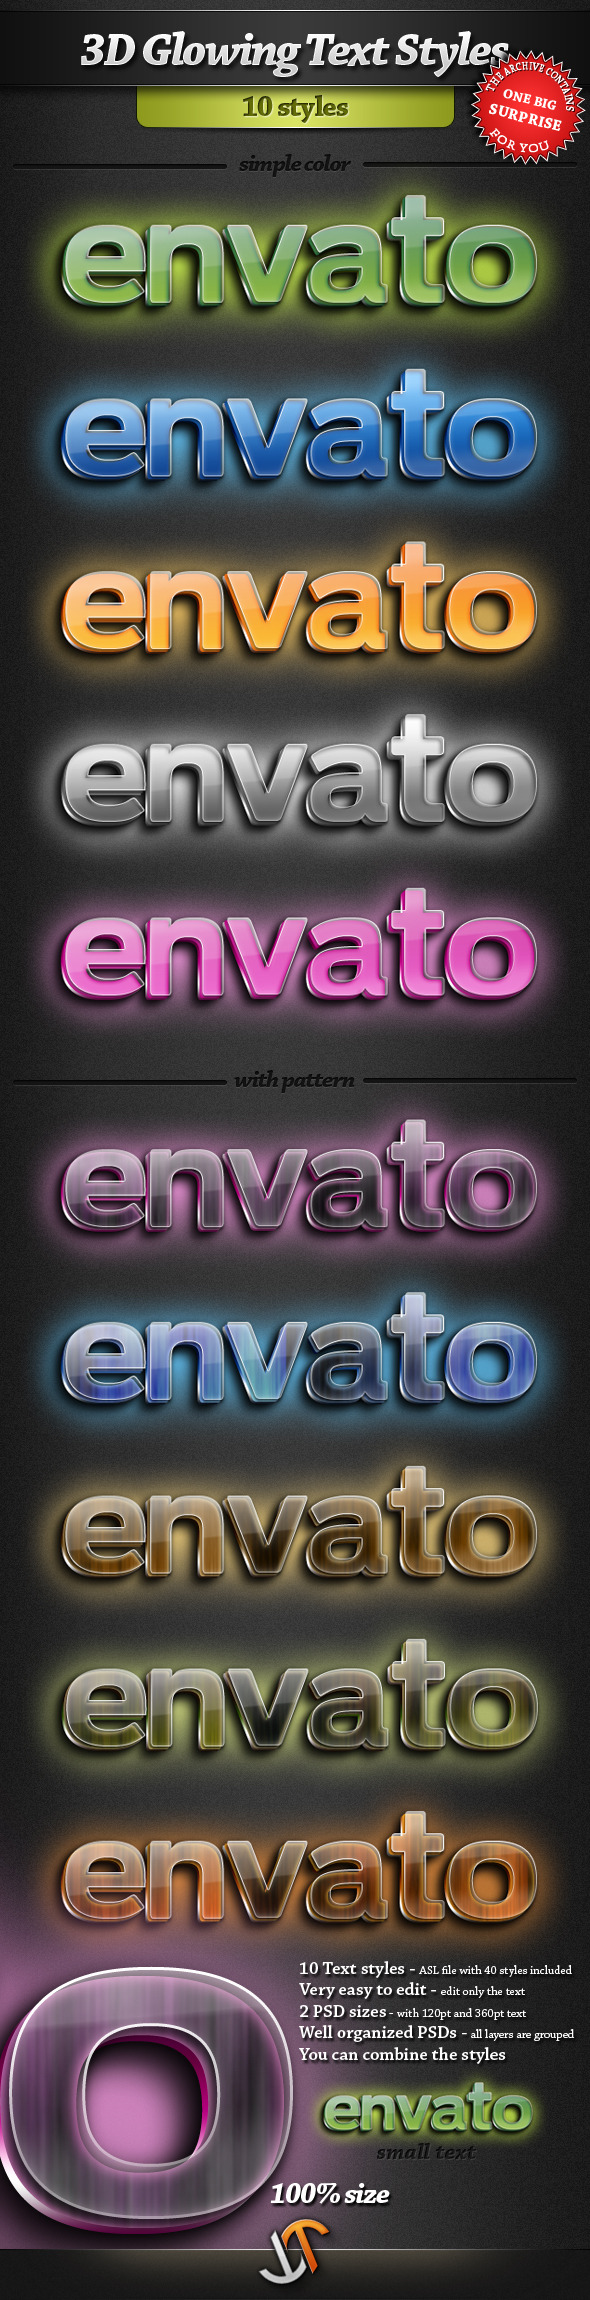 3D Glowing Text Styles